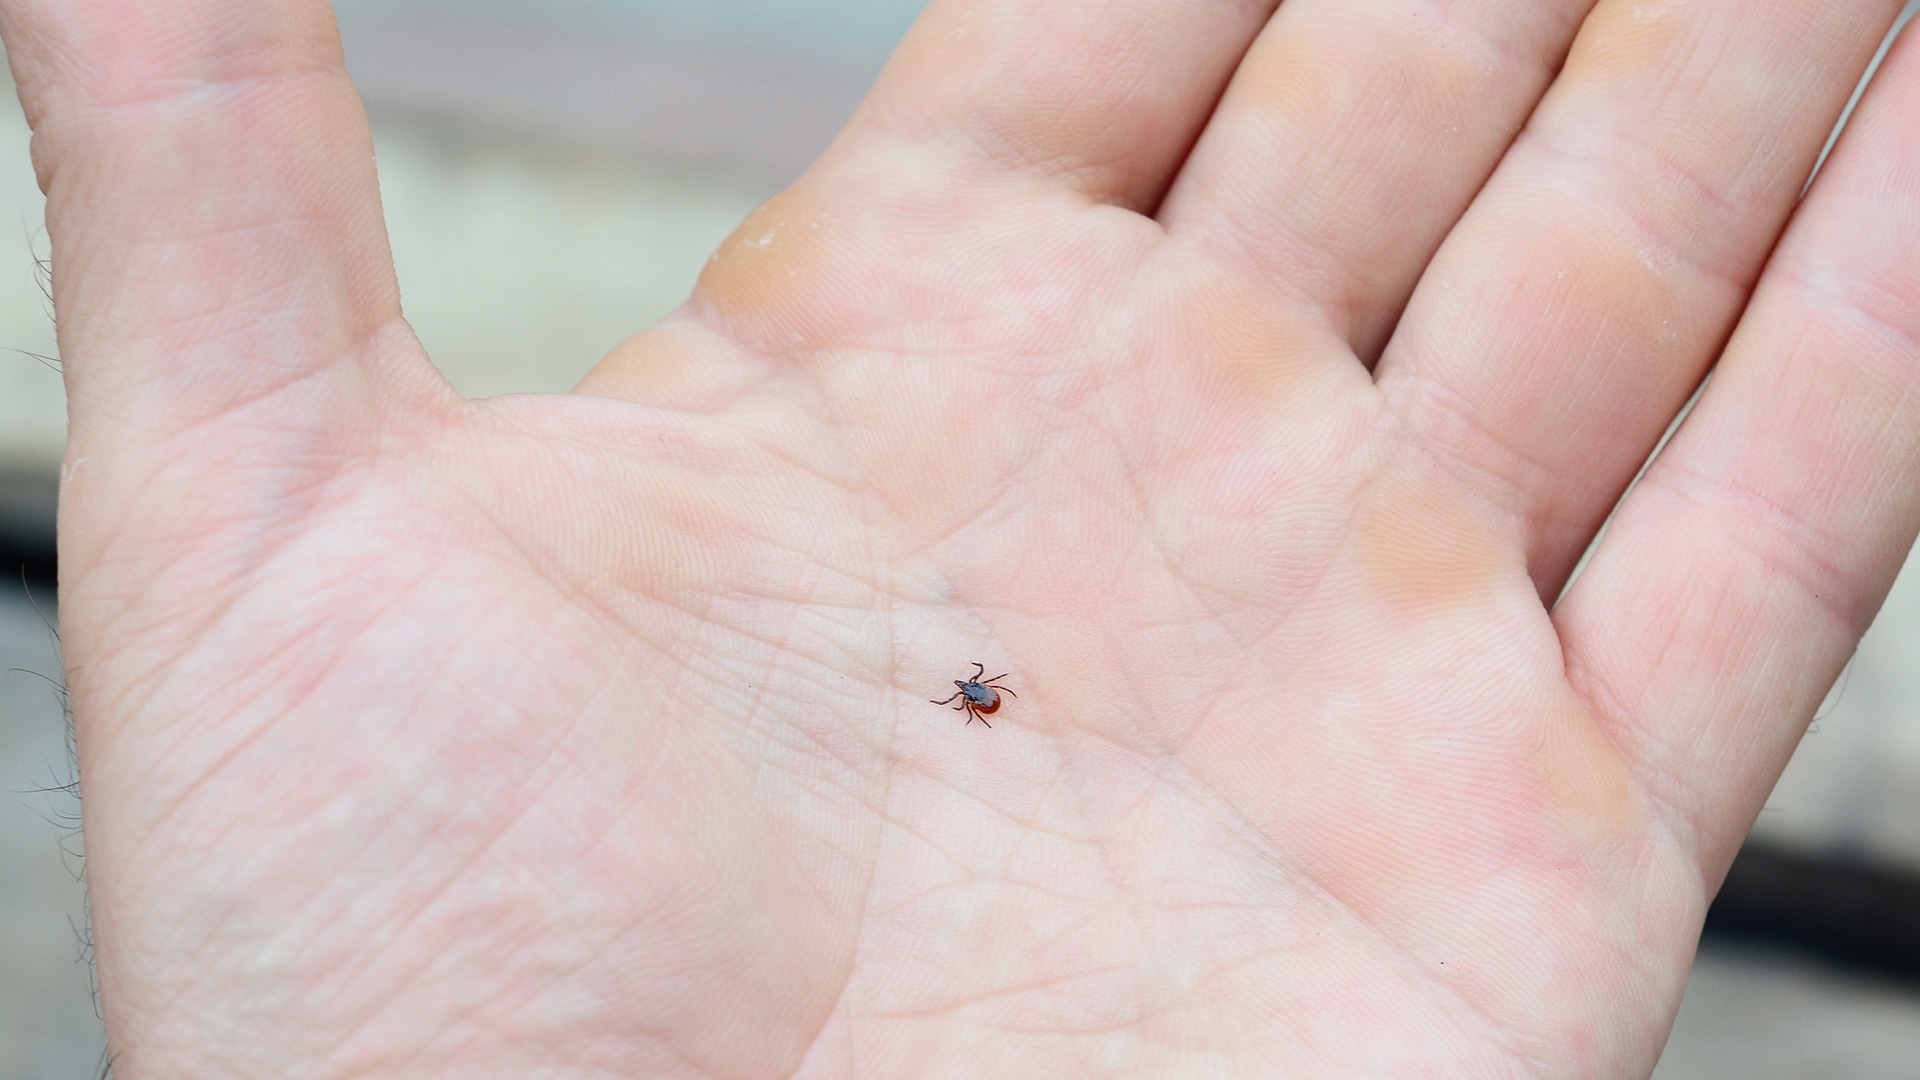 Ixodes scapularis in person's hand.